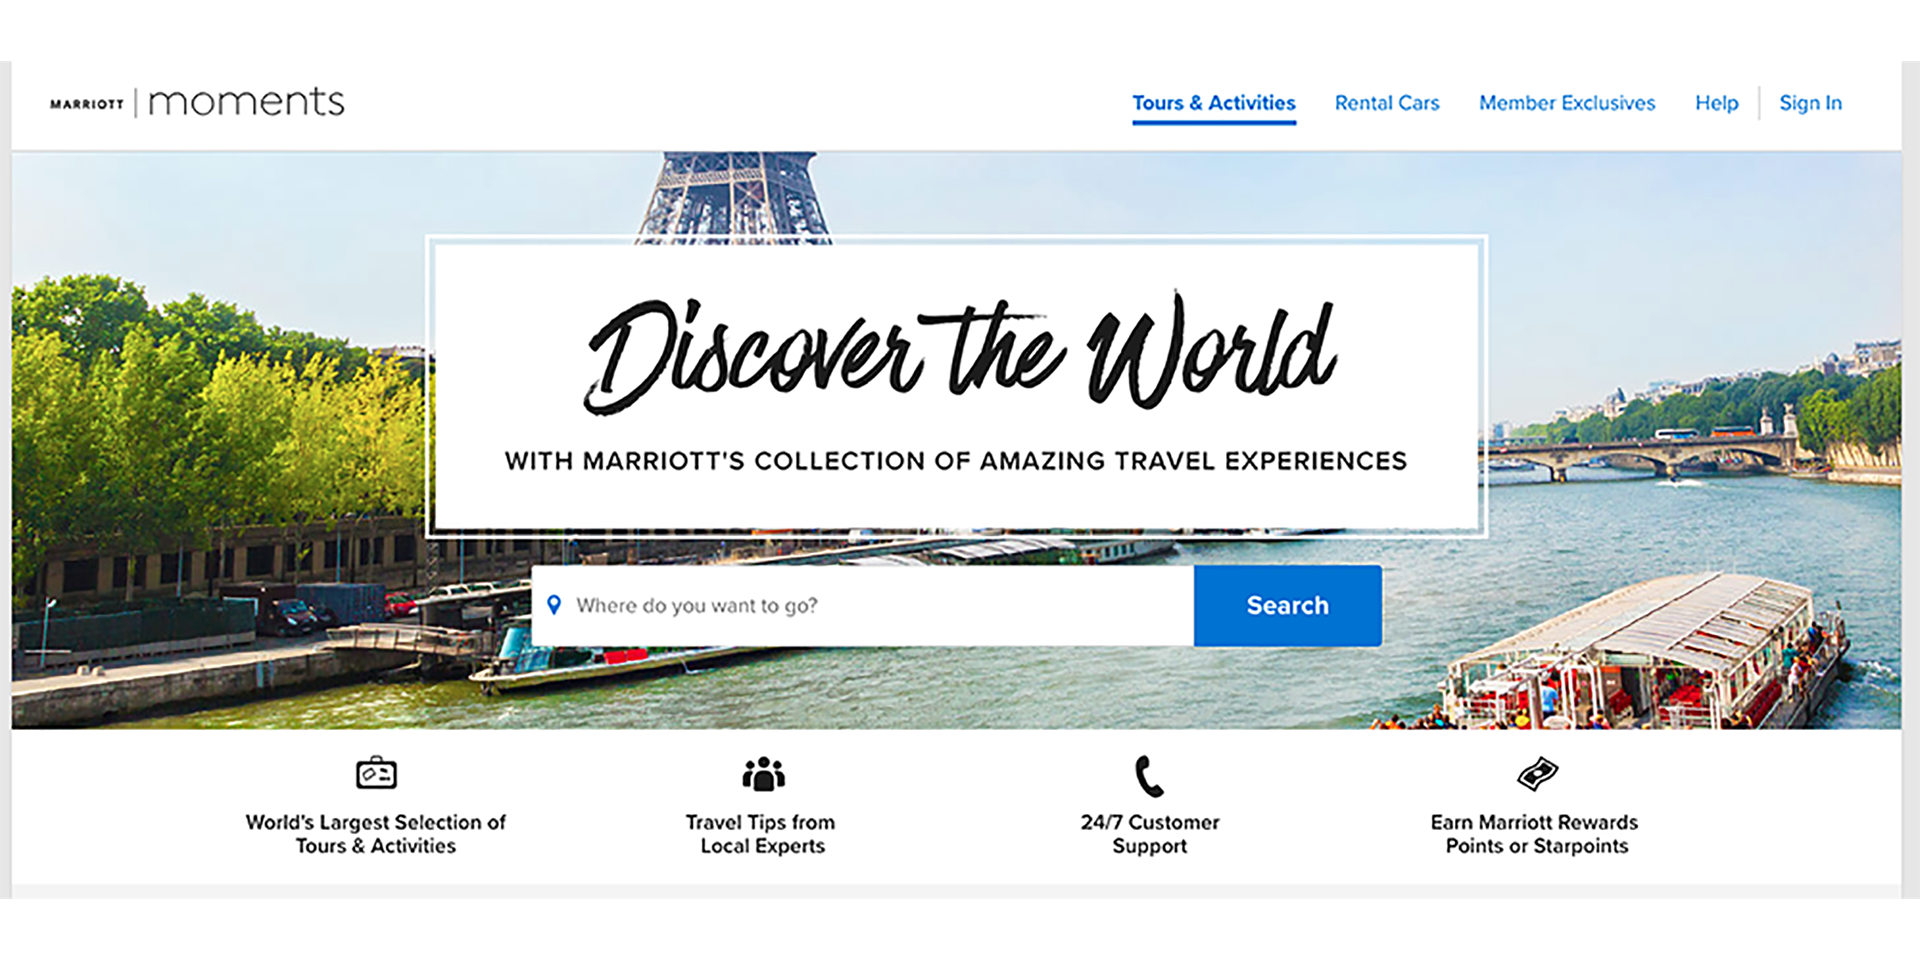 Marriott expands Marriott Moments with local-area expert recommendations, bespoke categories, and hand-curated lists of things to do this summer